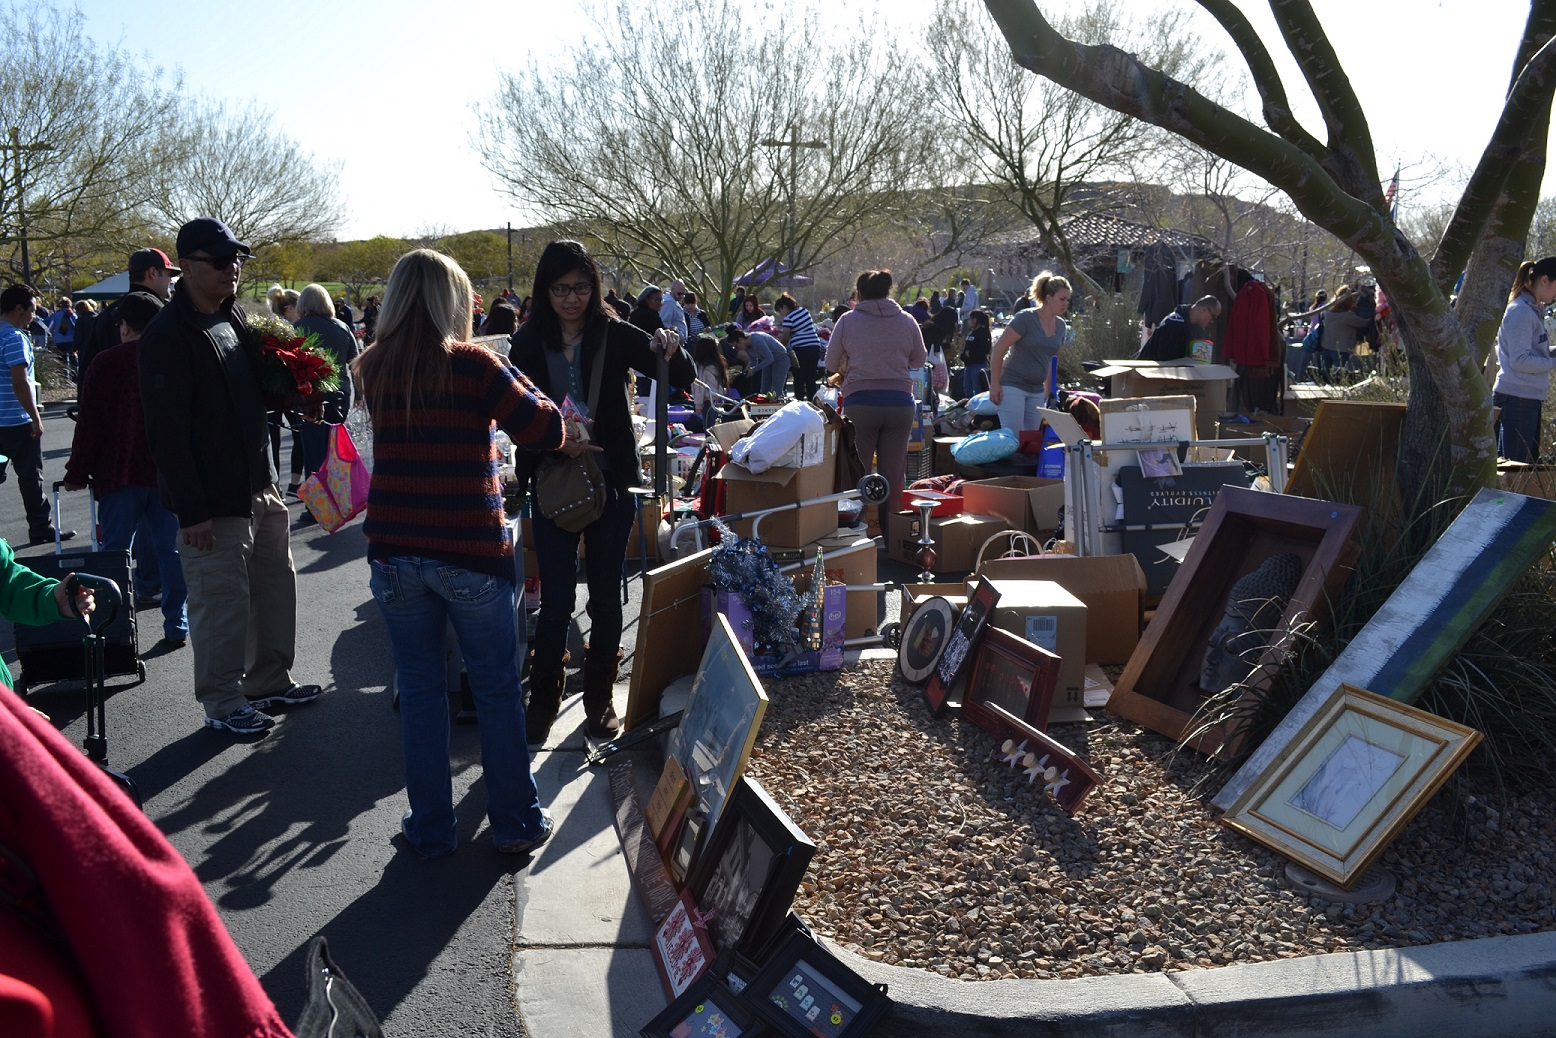 Join the Mountain’s Edge Master Planned Community for its annual Spring Garage Sale and a day of outdoor shopping for unexpected treasures and needed items at great prices.